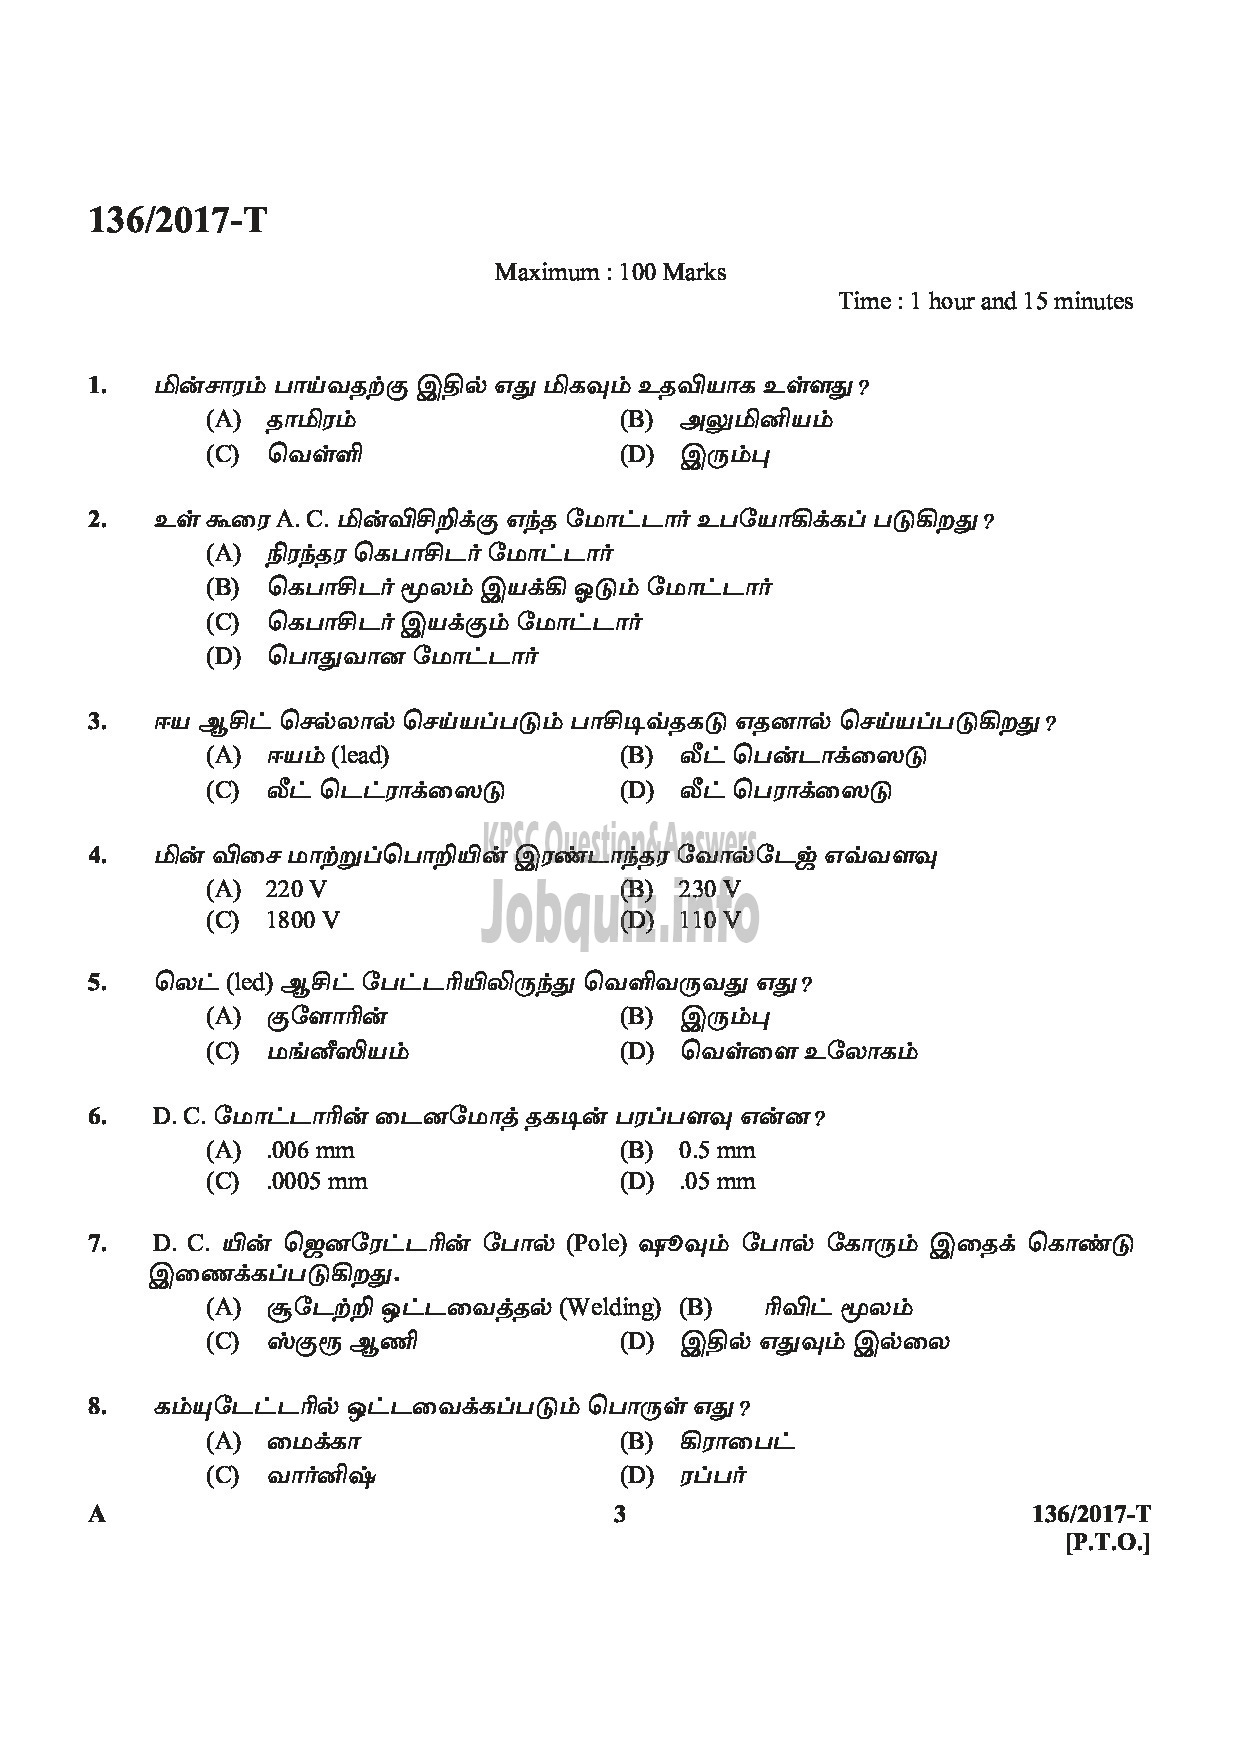 Kerala PSC Question Paper - METER READER/SPOT BILLER SPECIAL RECRUITMENT FROM AMONG ST ONLY MEDIUM OF QUESTION TAMIL-3